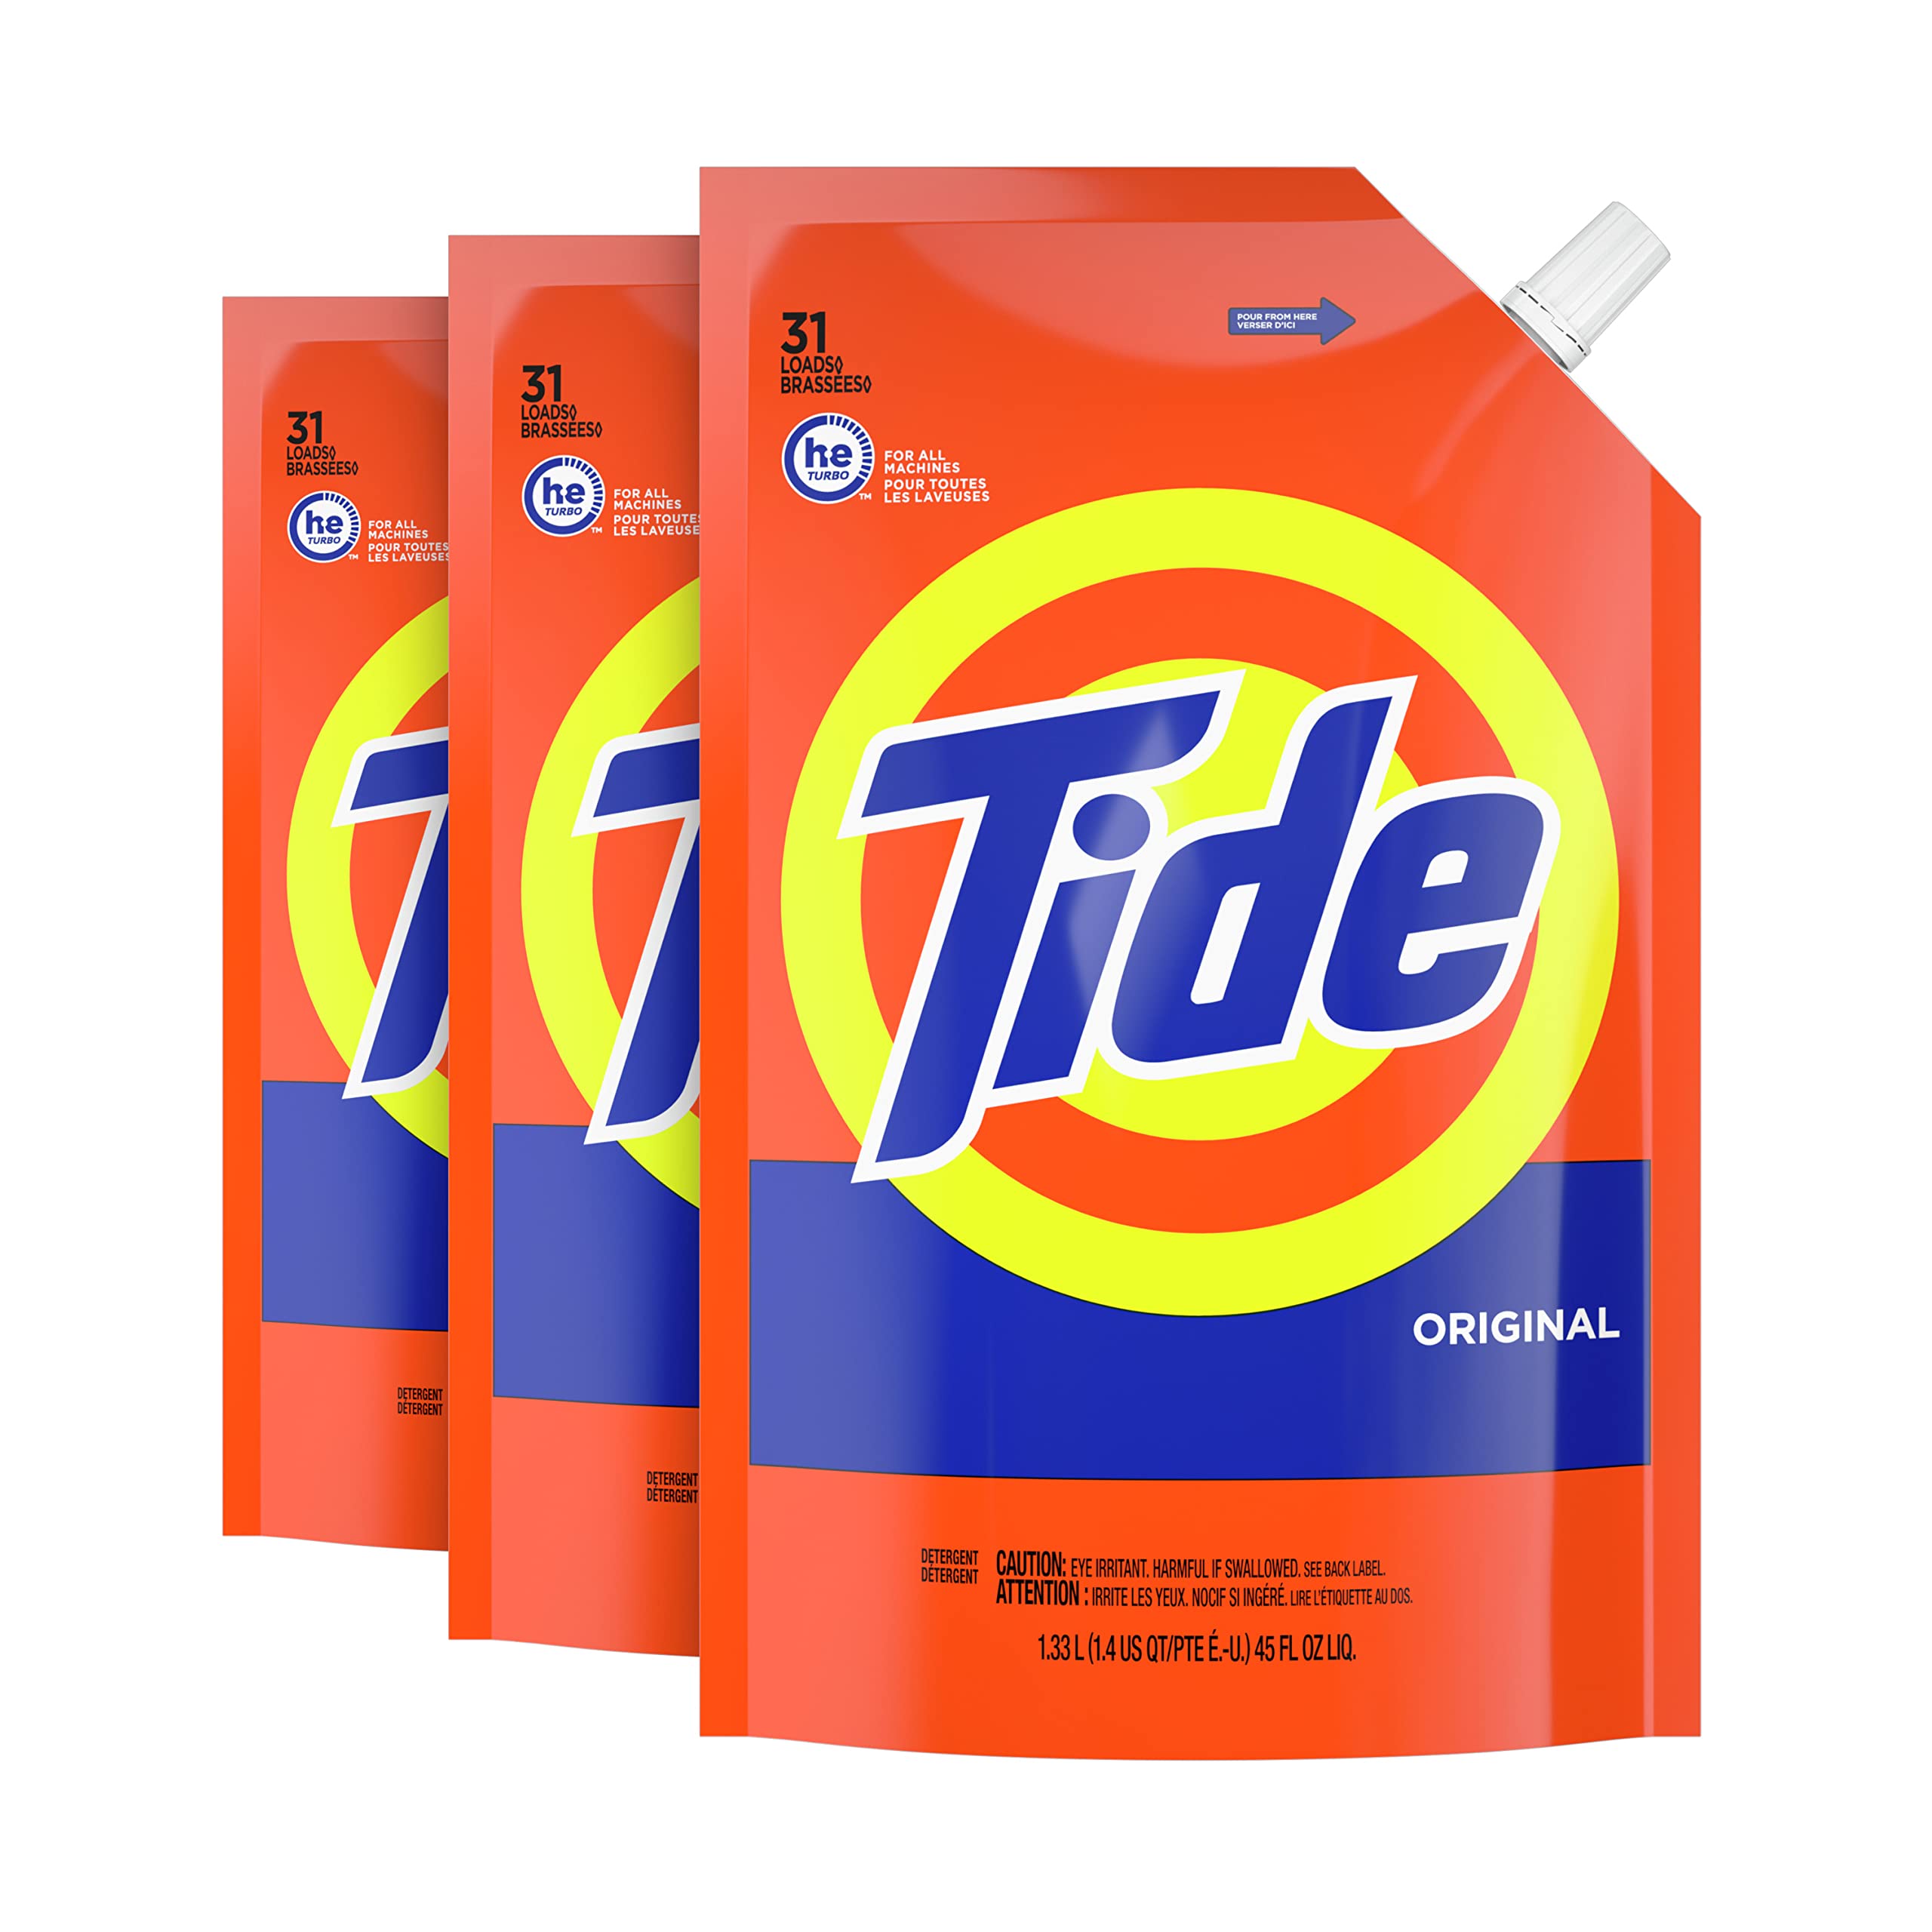 3-Pack 45-Oz Tide High Efficiency Liquid Laundry Detergent (Original) + $15 Amazon Credit 3 for $42 & More after $15 Rebate w/ S&S + Free Shipping